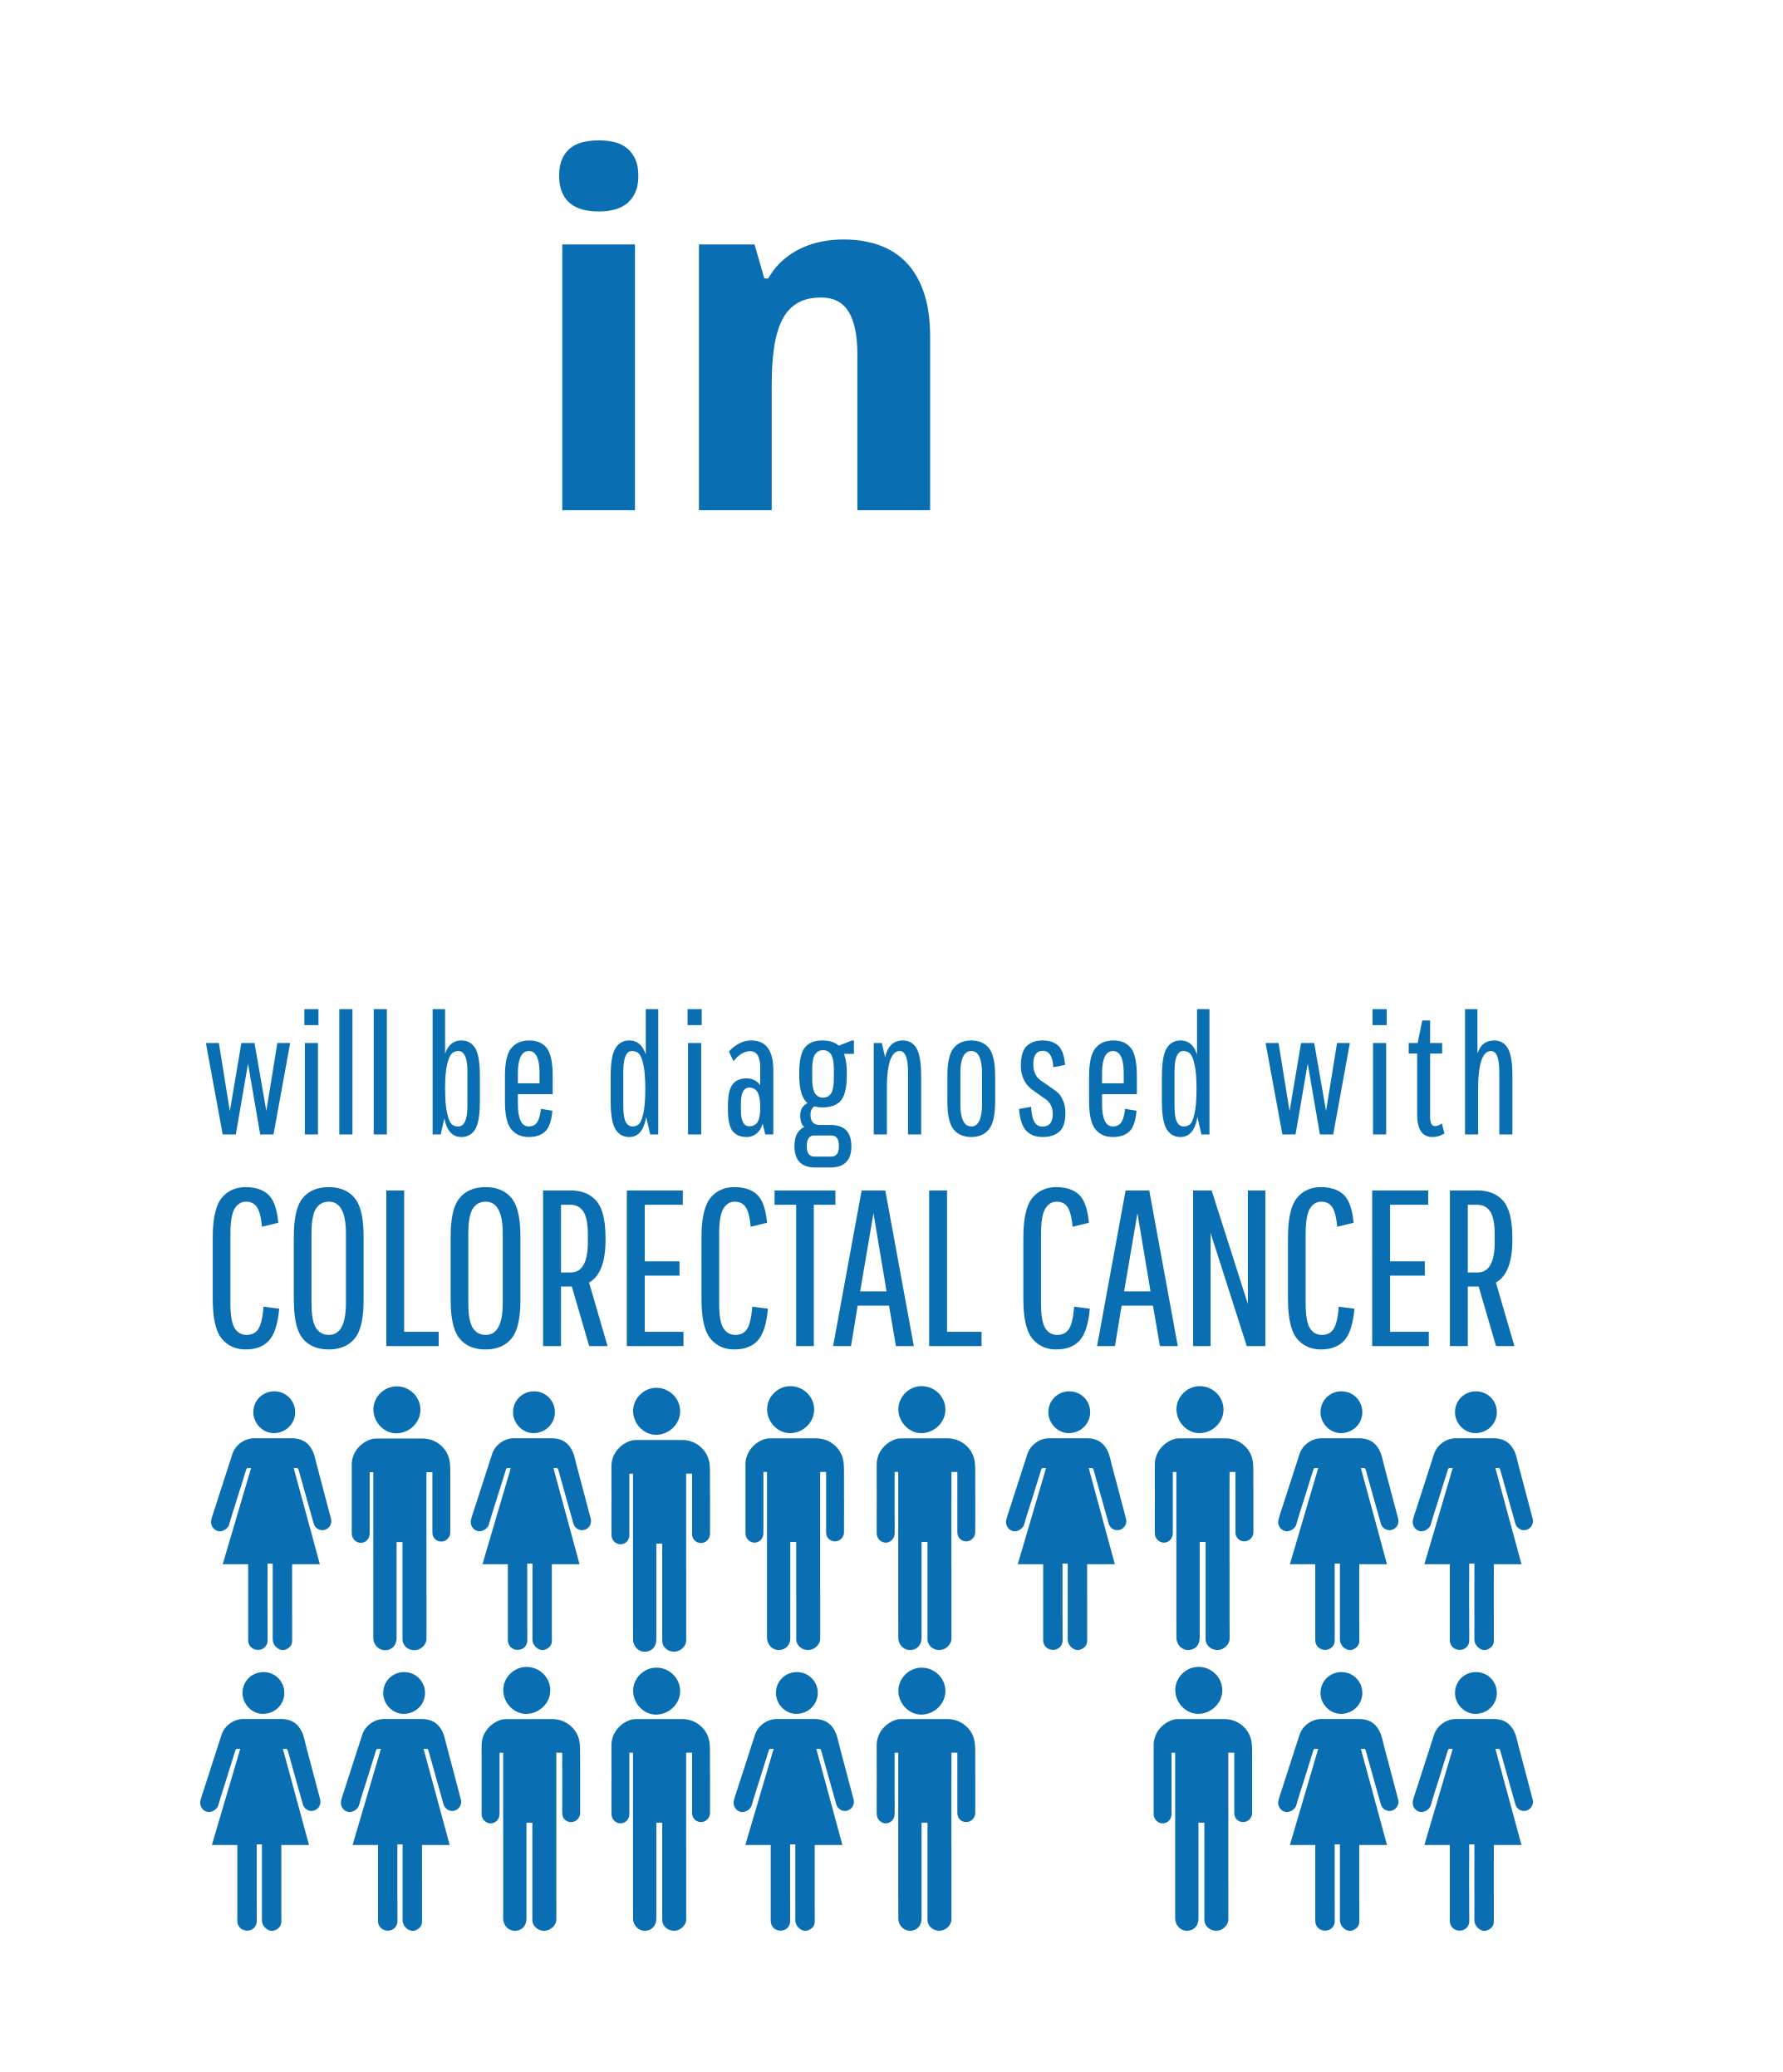 Colorectal Cancer infographic